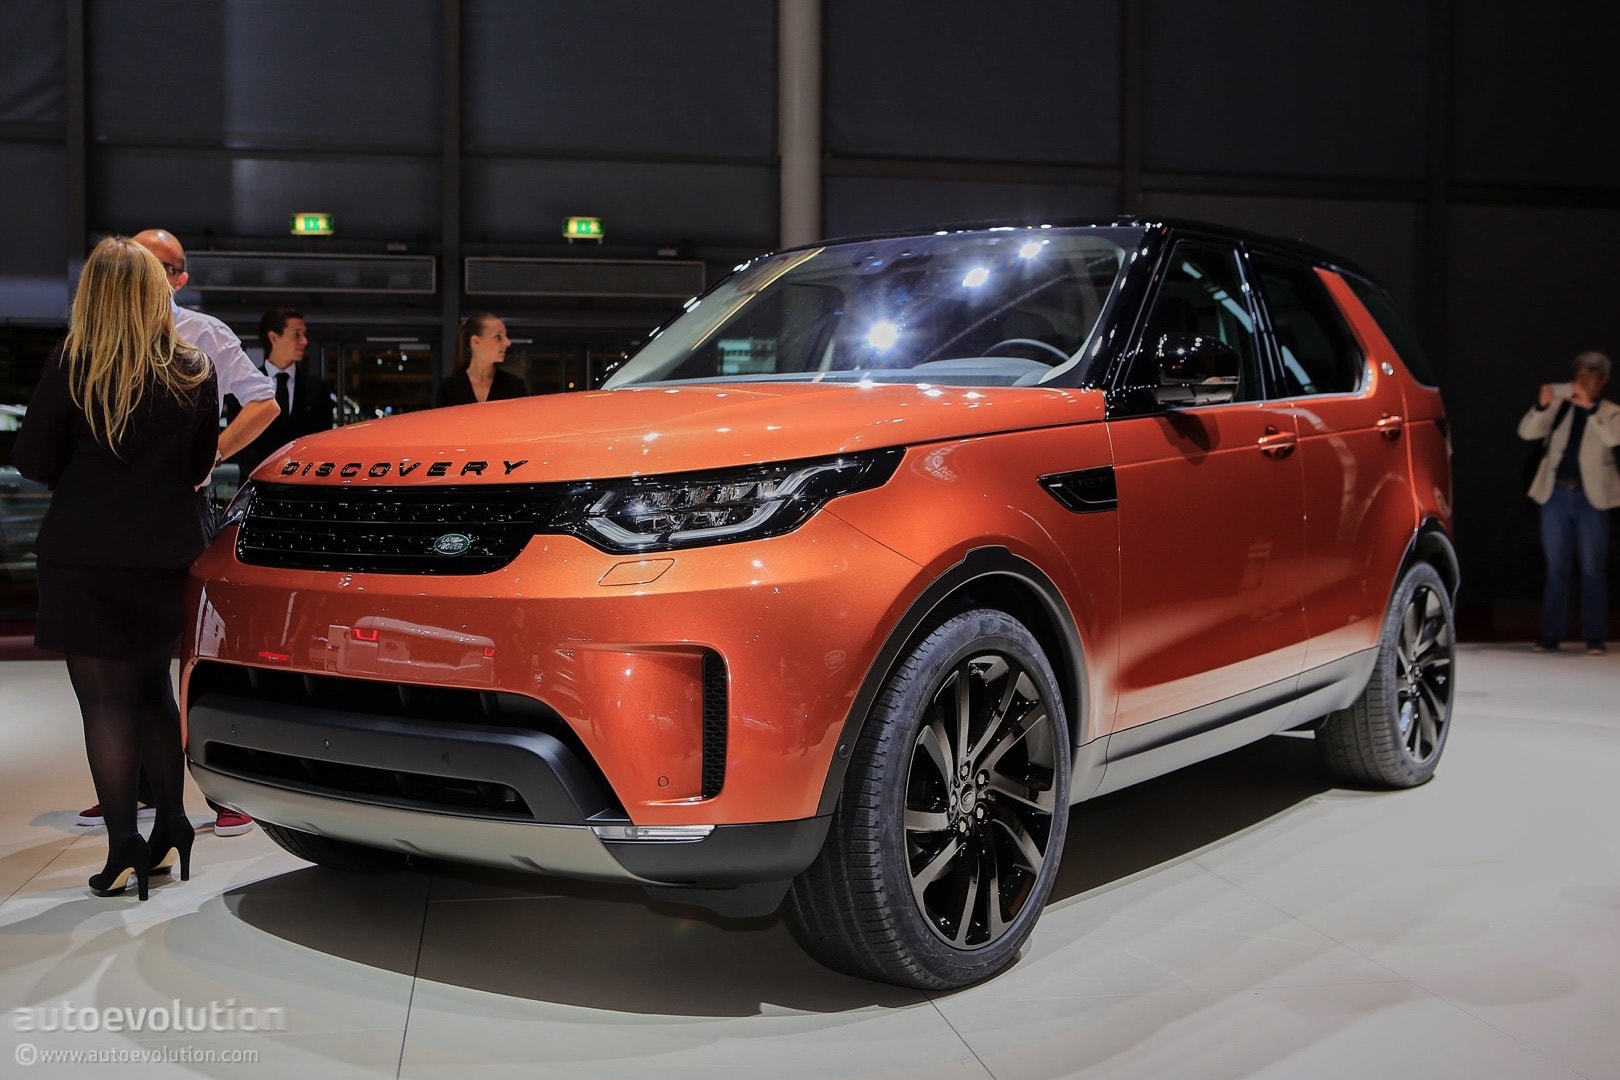 https://s1.cdn.autoevolution.com/images/news/2017-land-rover-discovery-presented-in-paris-as-the-brands-most-versatile-suv-111688_1.jpg